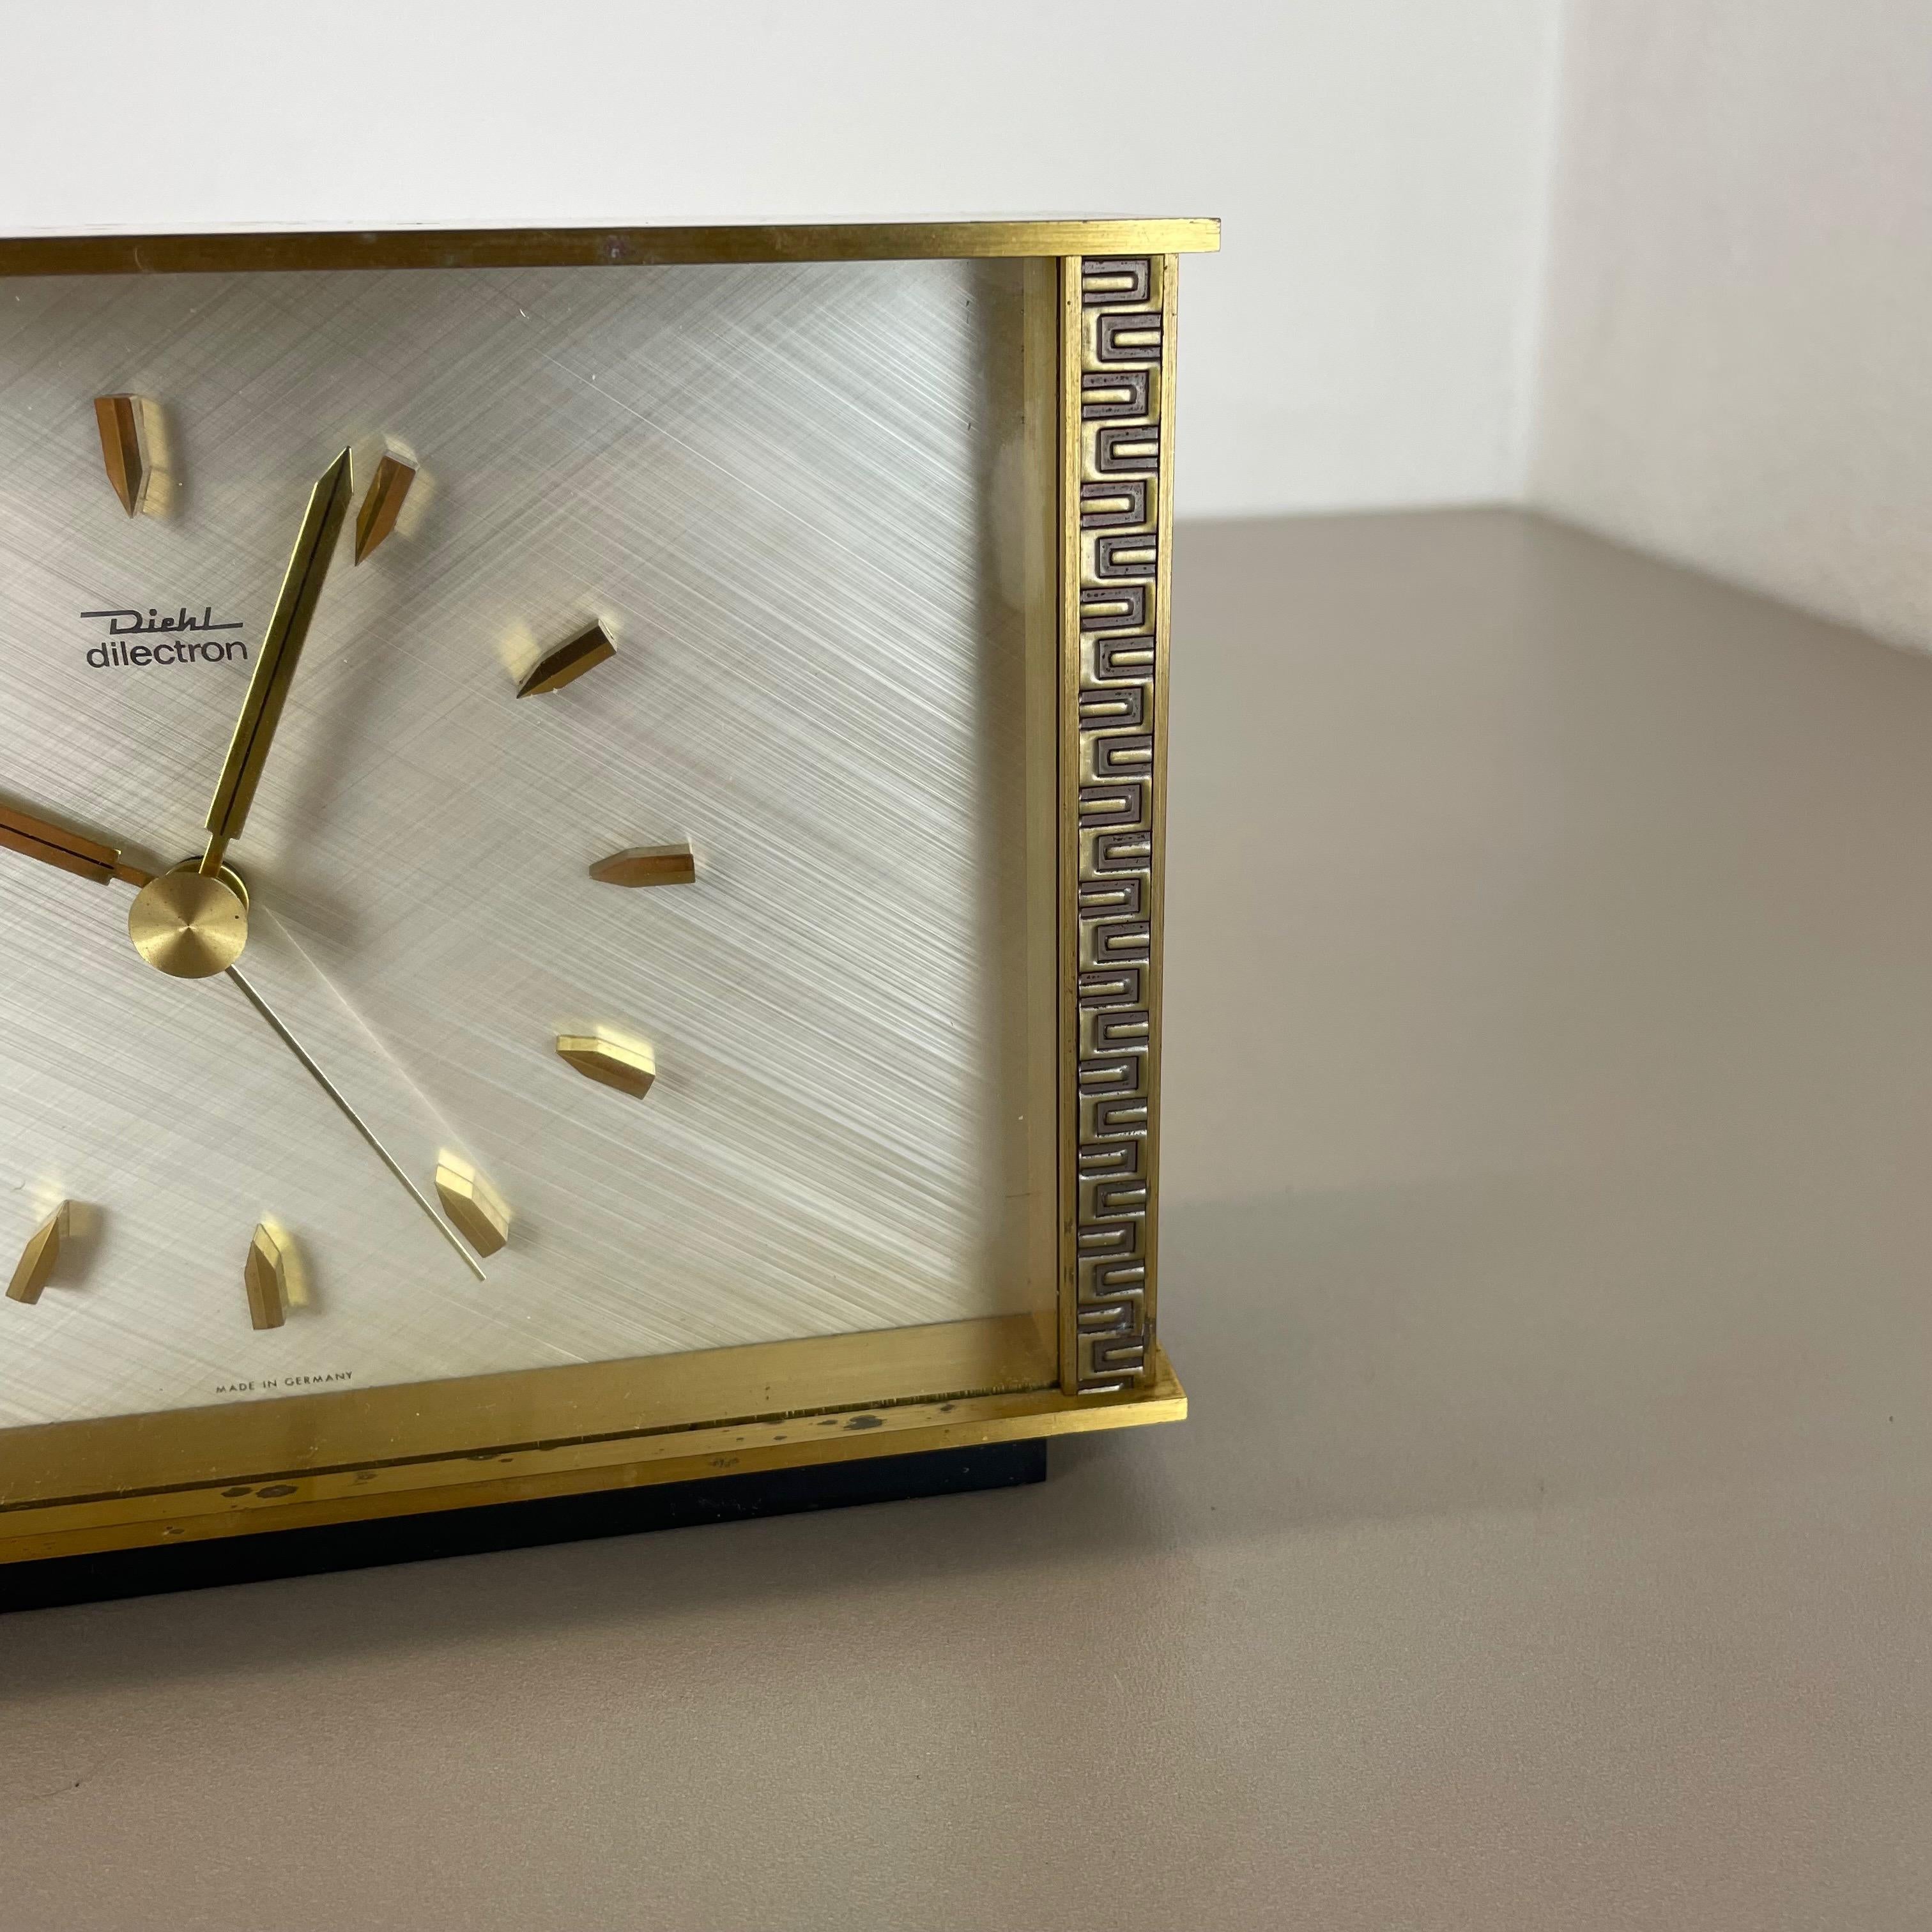 Vintage Modernist Metal Brass Table Clock by Diehl Dilectron, Germany 1960s For Sale 5